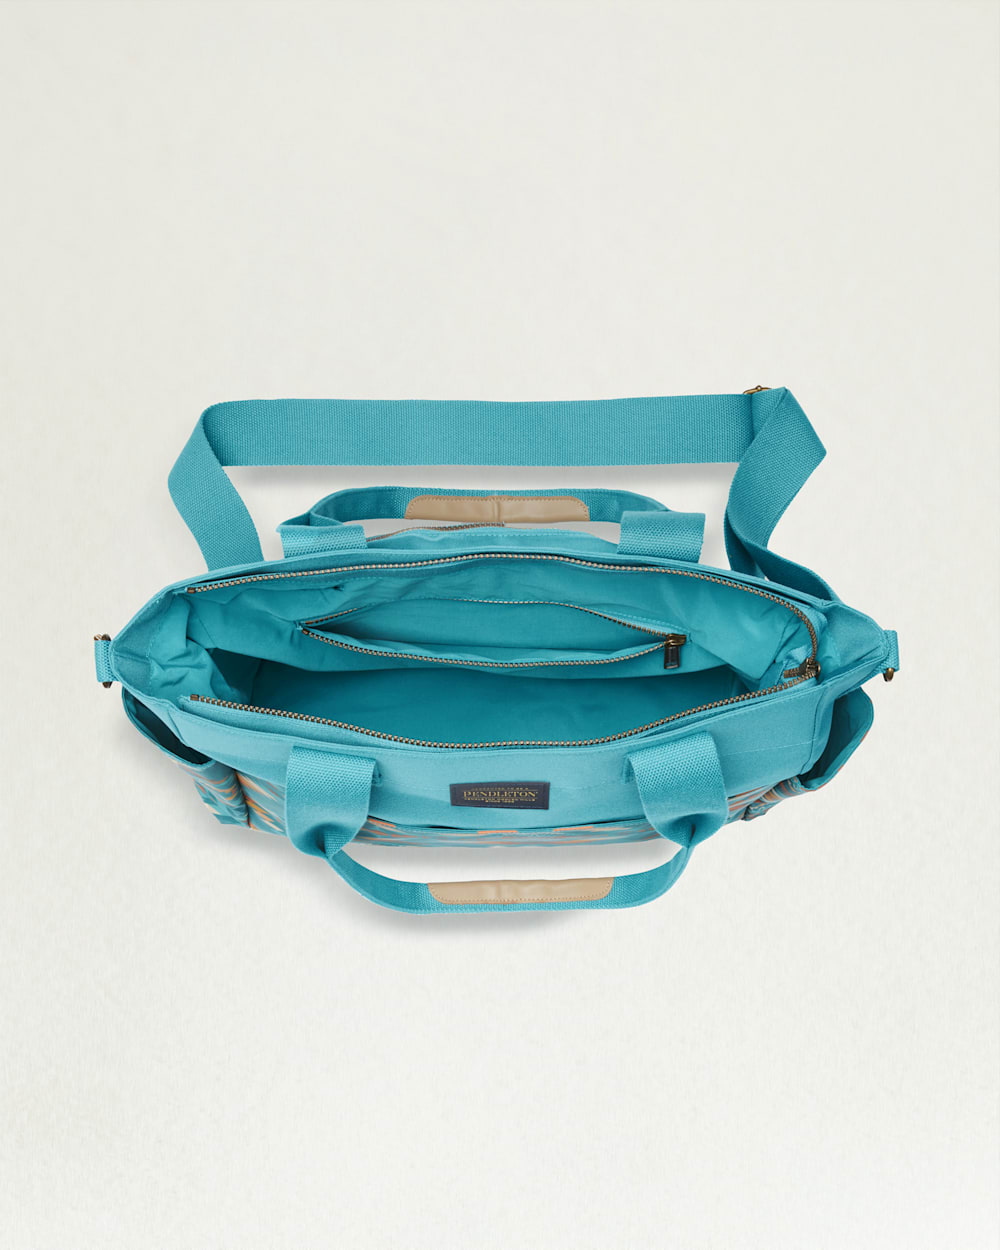 ALTERNATE VIEW OF SUMMERLAND BRIGHT CANOPY CANVAS SUPER TOTE IN TURQUOISE image number 3